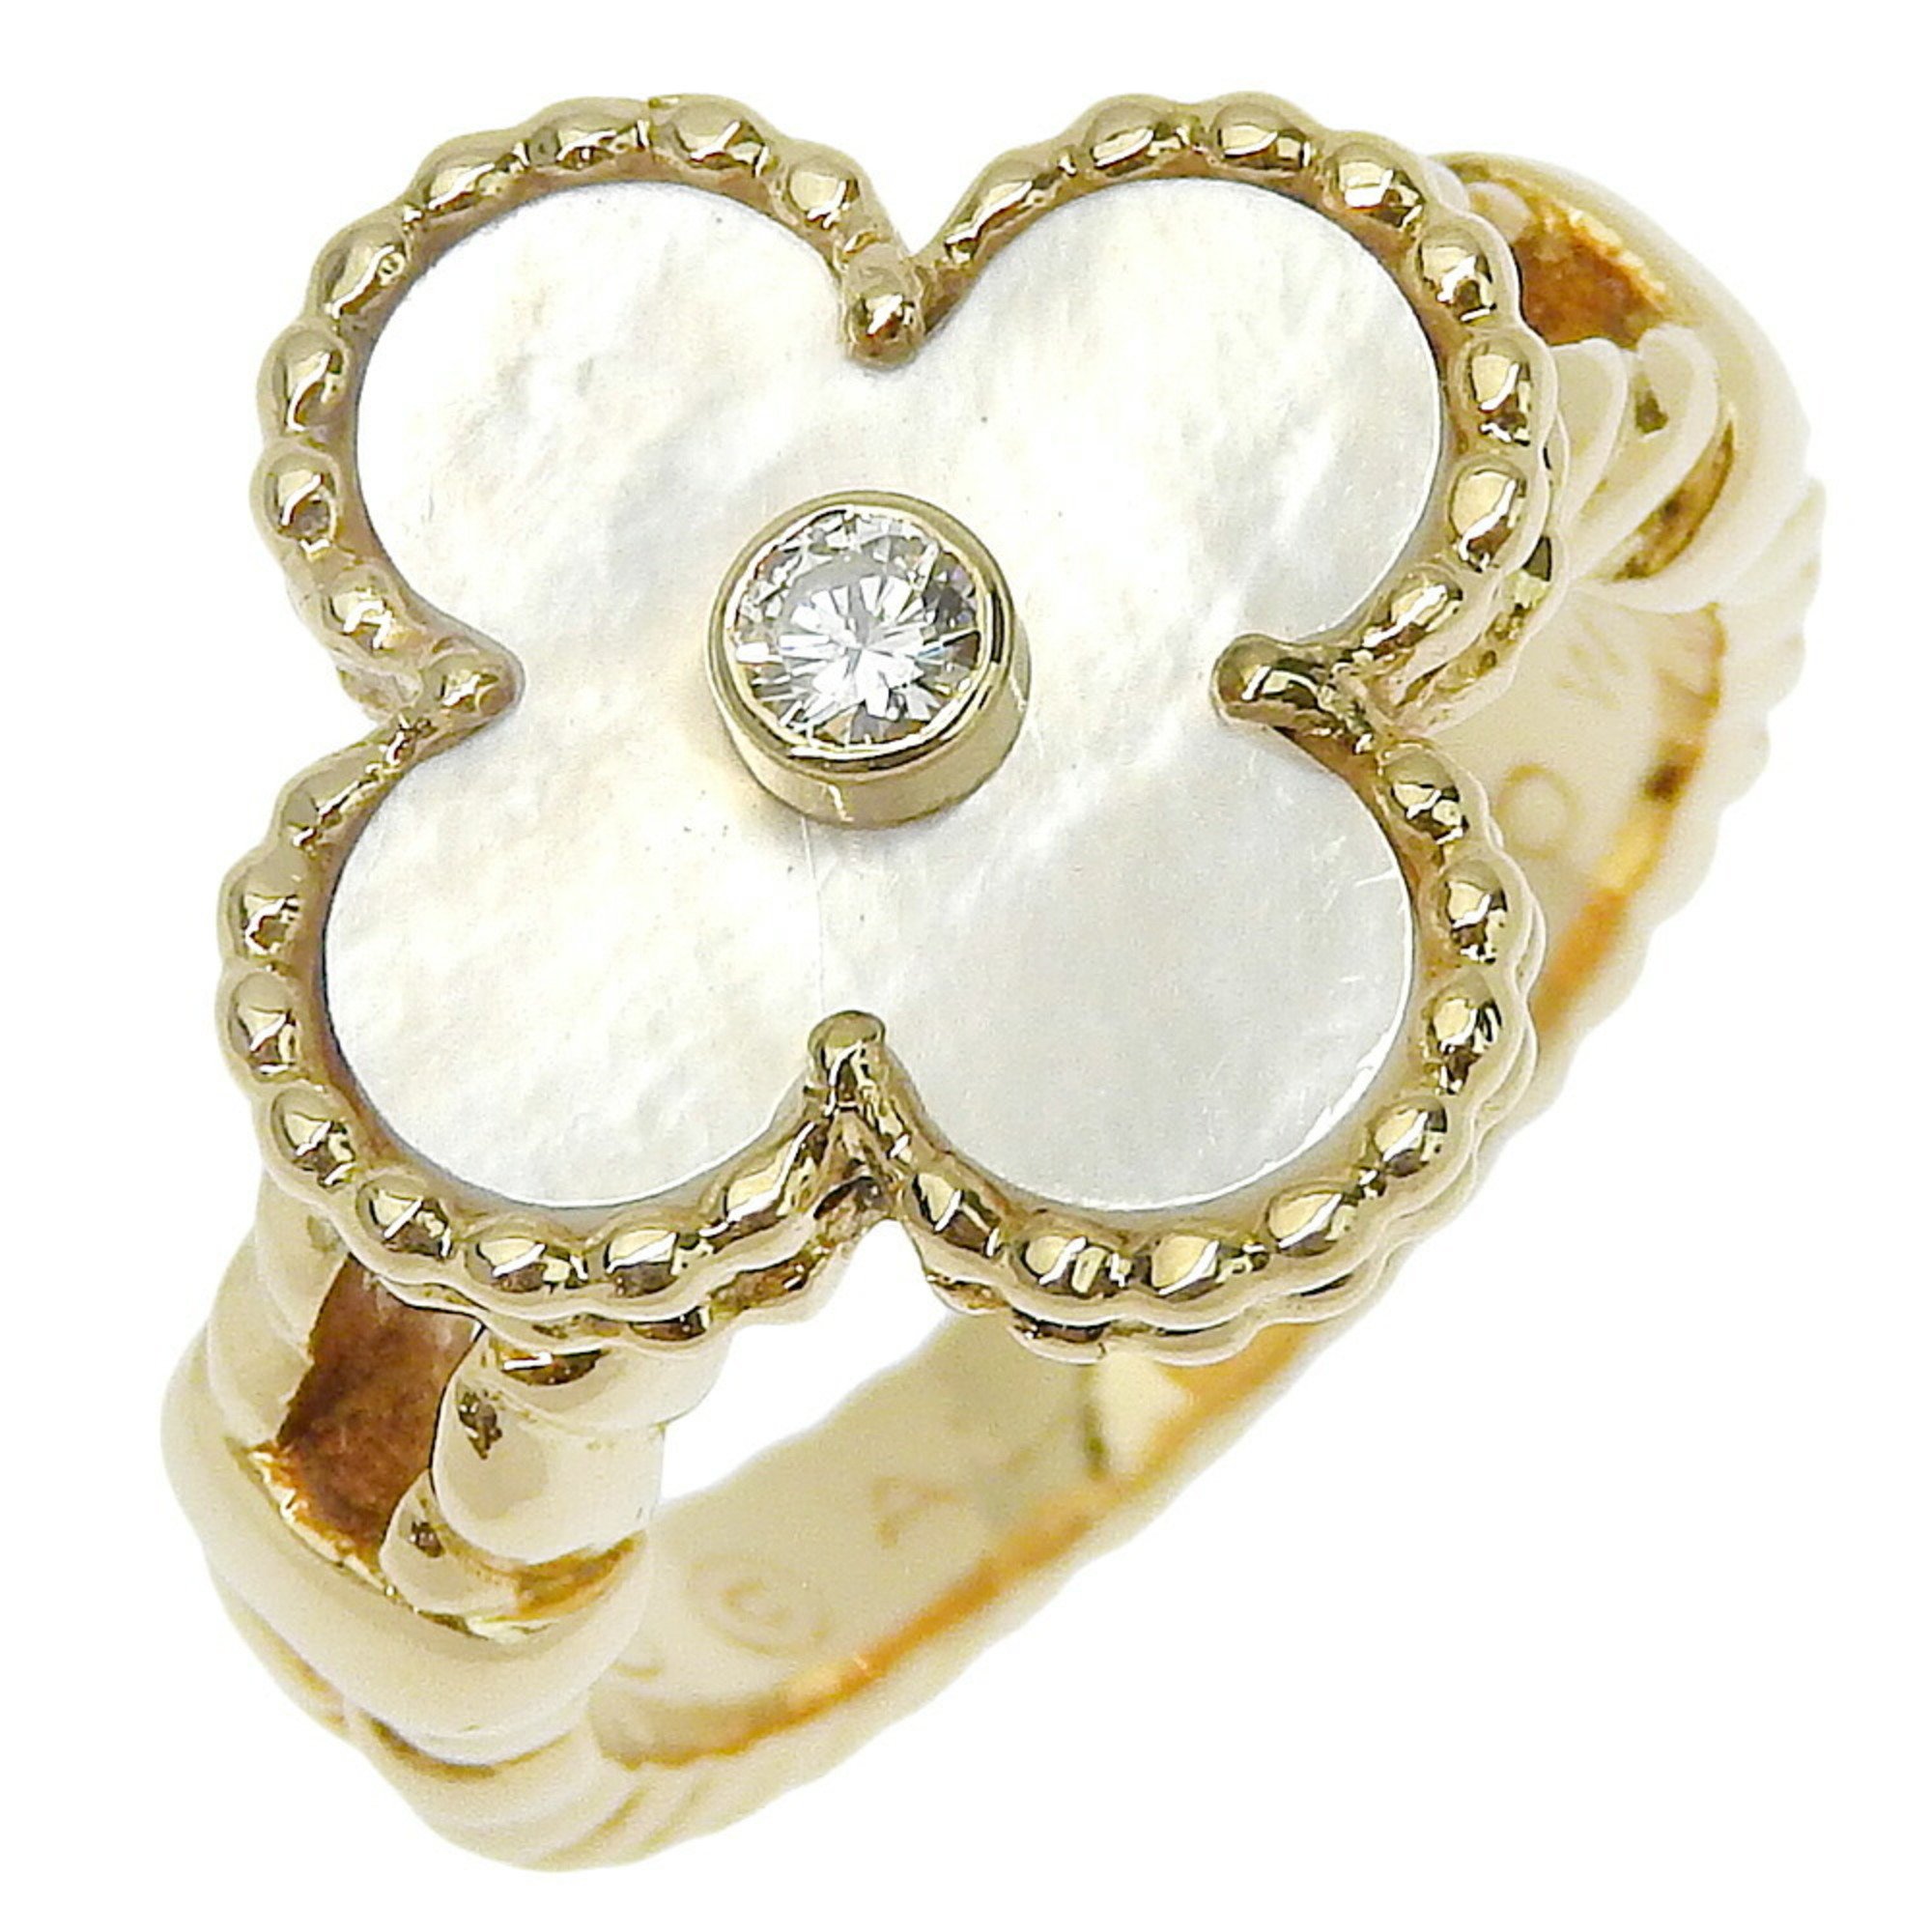 Van Cleef & Arpels Alhambra size 9 ring, K18 yellow gold, white shell, approx. 7.5g, Alhambra, women's